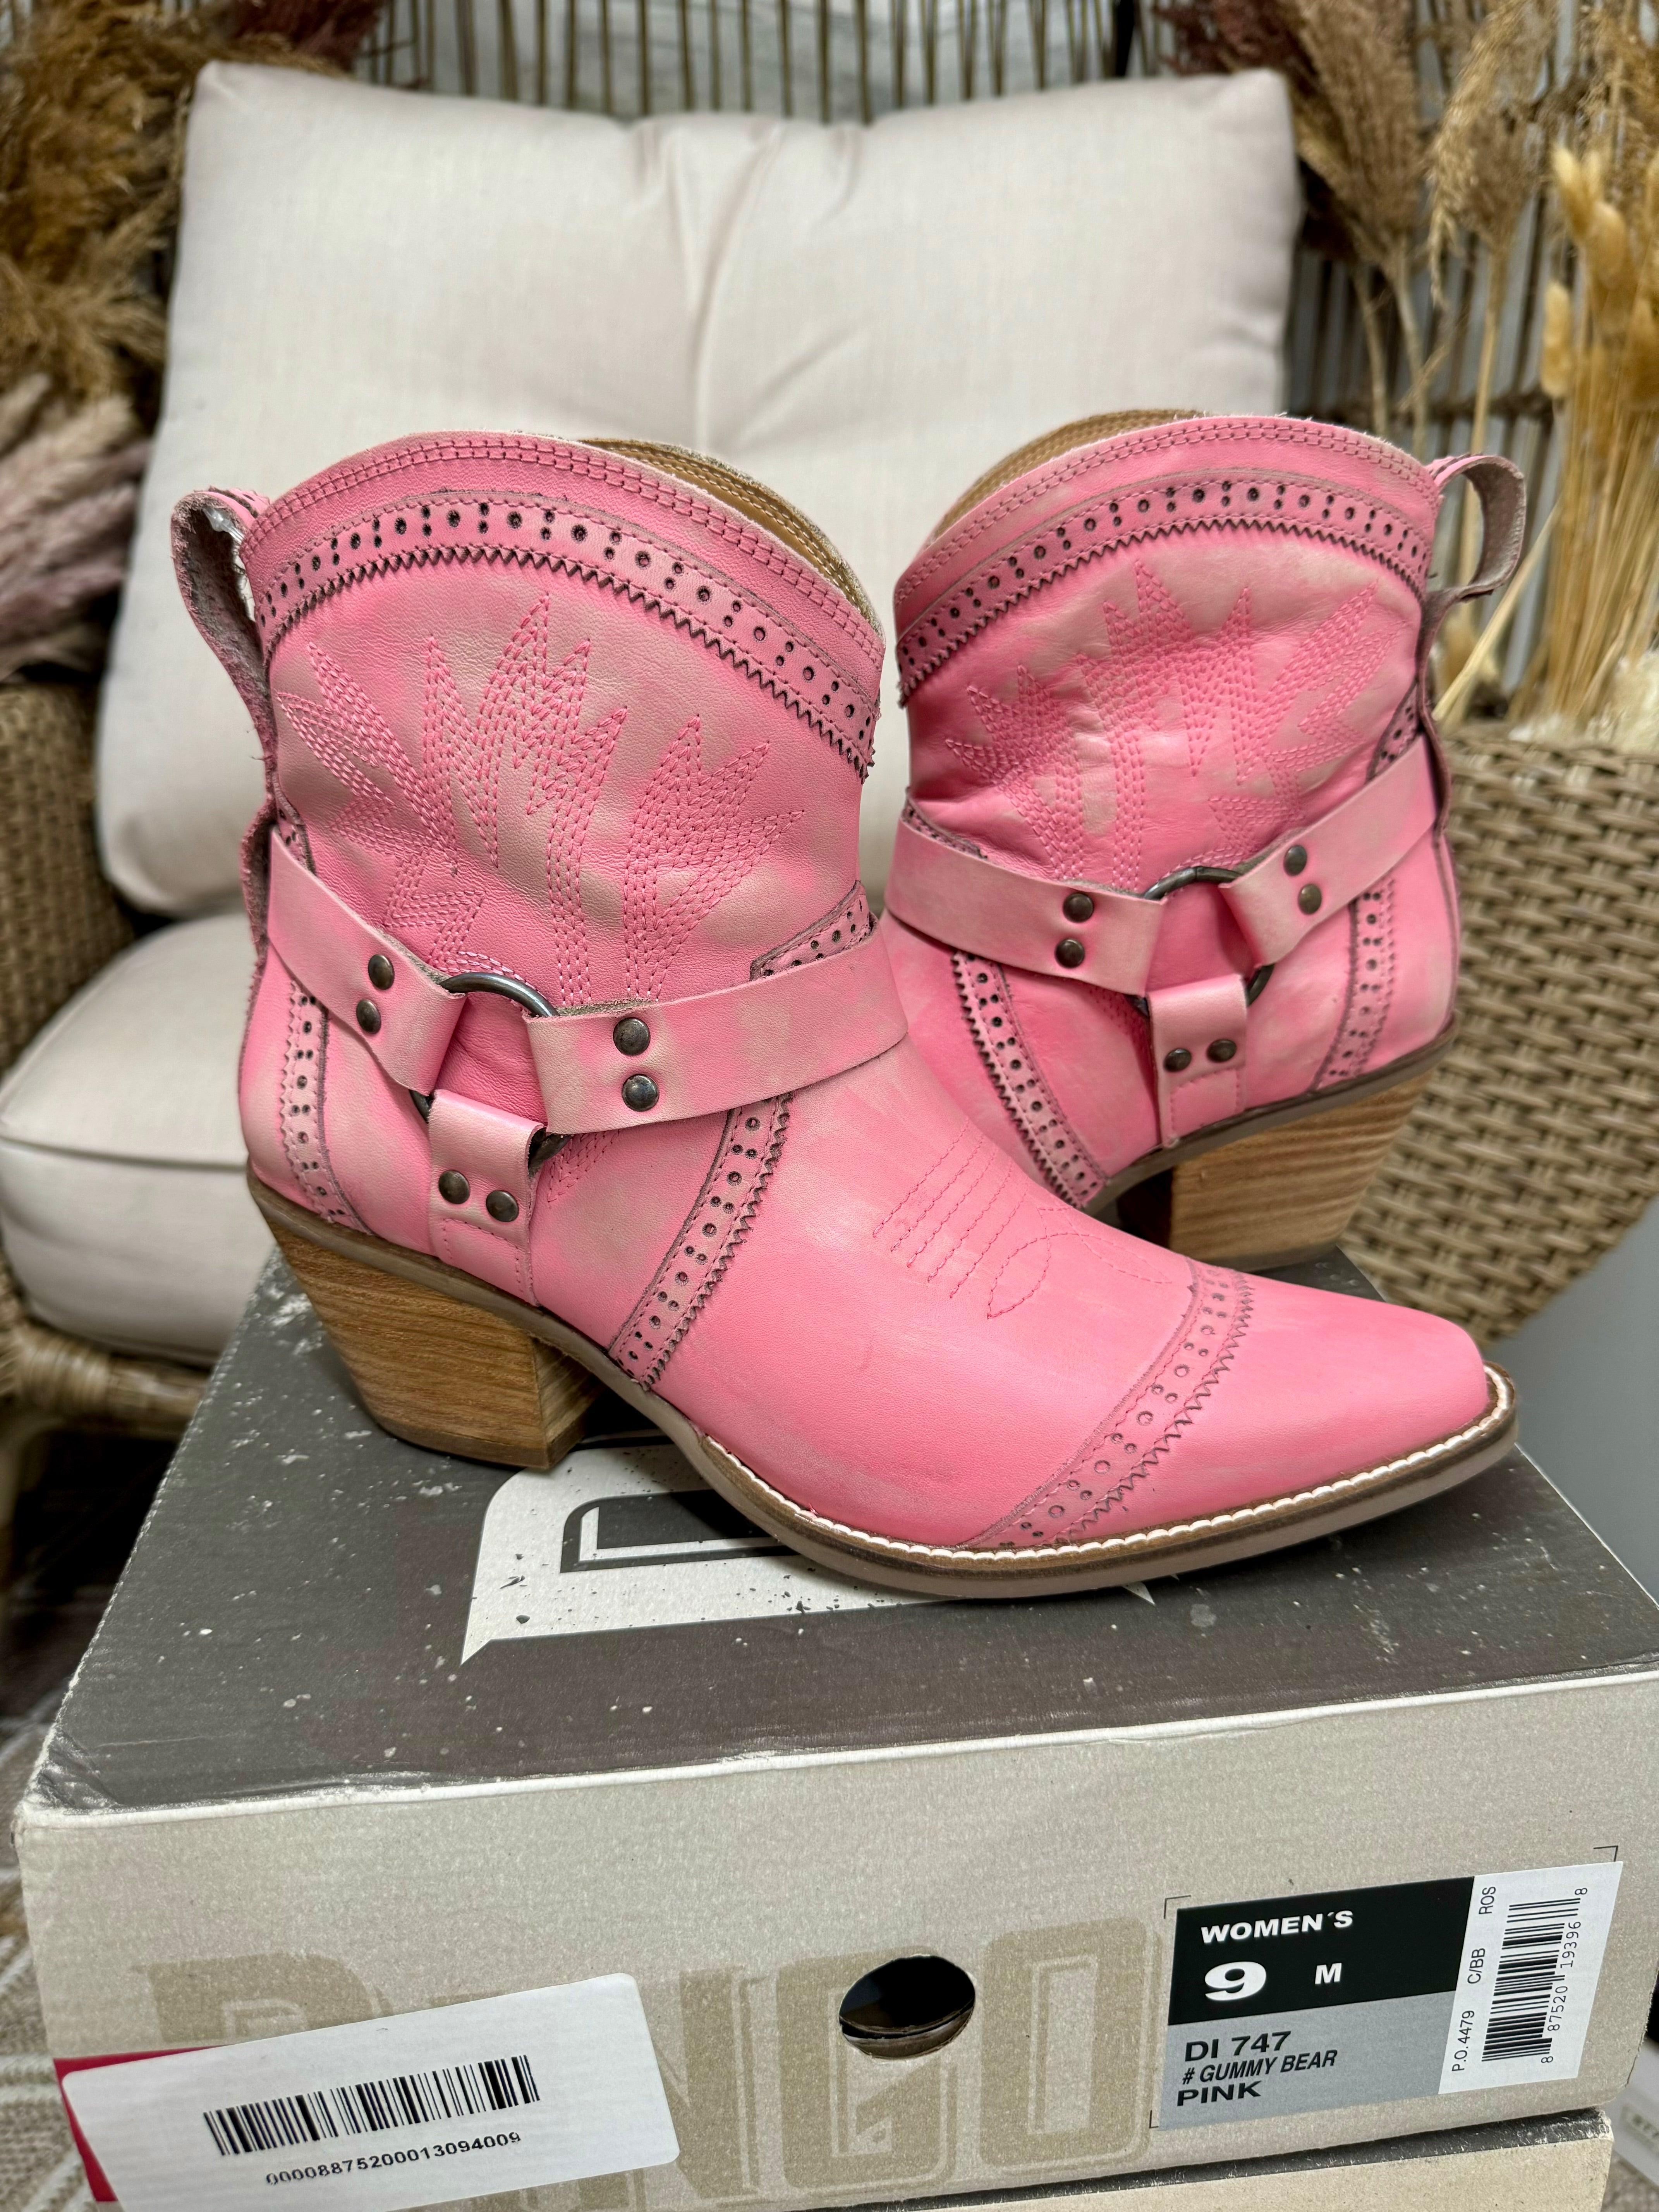 Model Shoes Size 9 | Dingo | Gummy Bear Leather Cowboy Boots in Pink *DISCONTINUED* - Giddy Up Glamour Boutique